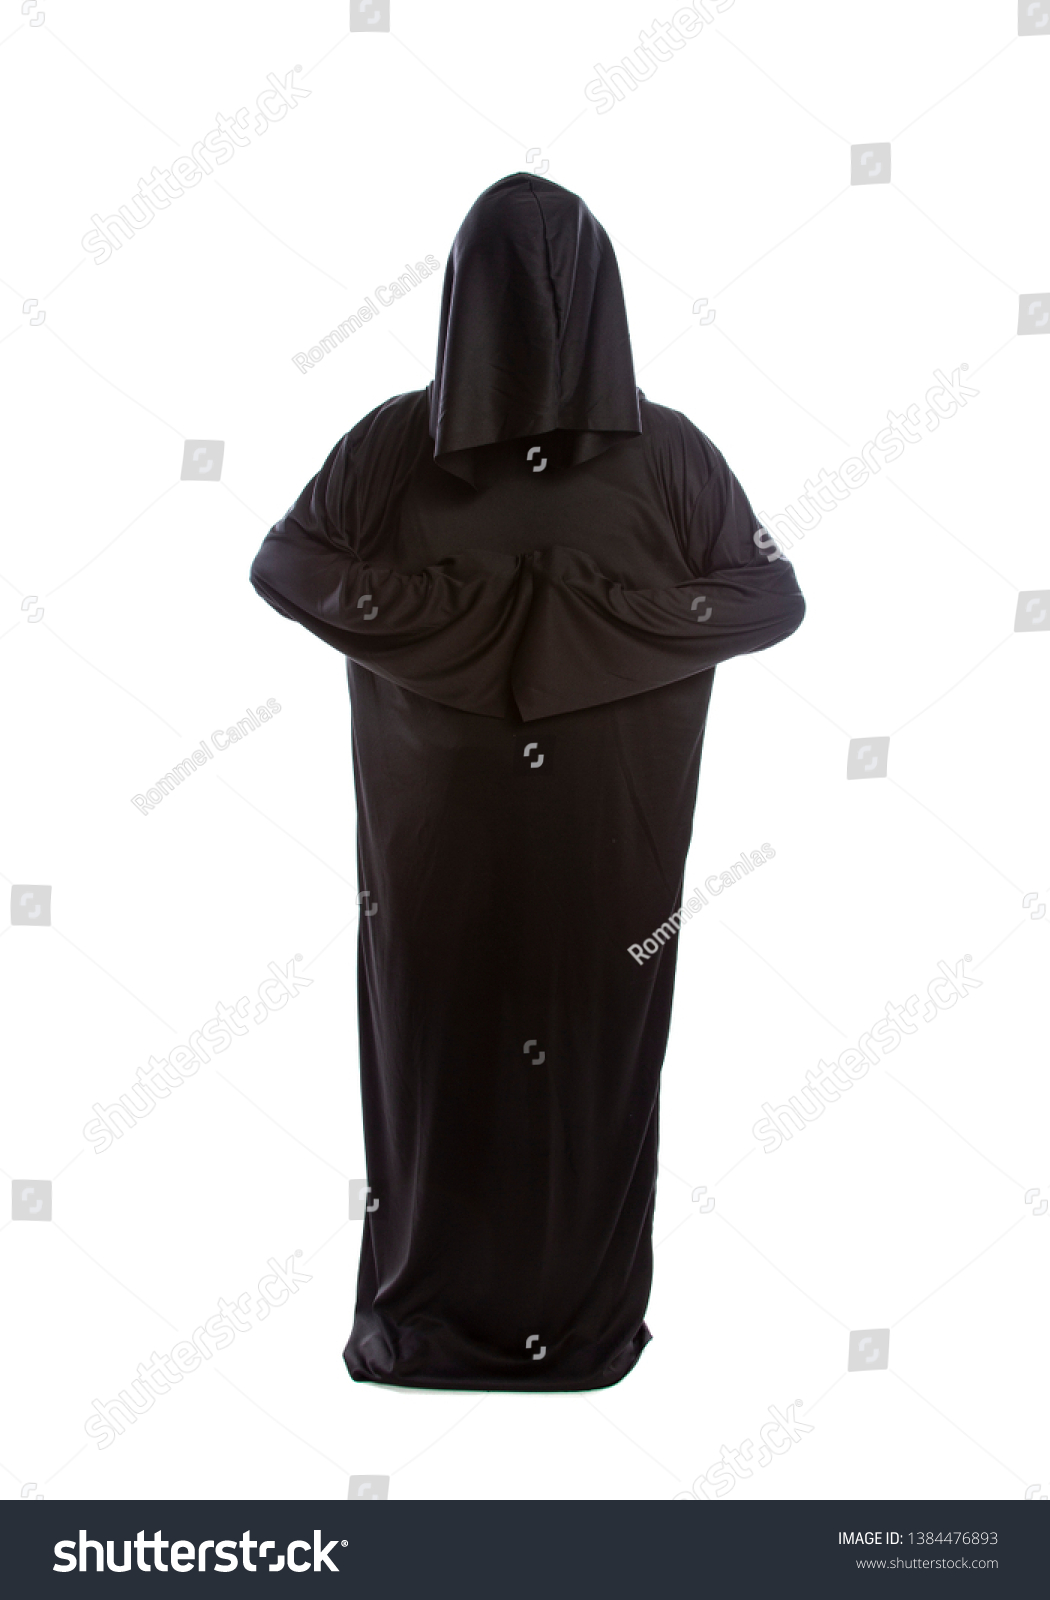 Monk wearing black robes and a hood or a person in a halloween costume of a grim reaper ghost.  The image depicts a priest in traditional or ancient clothing.  #1384476893